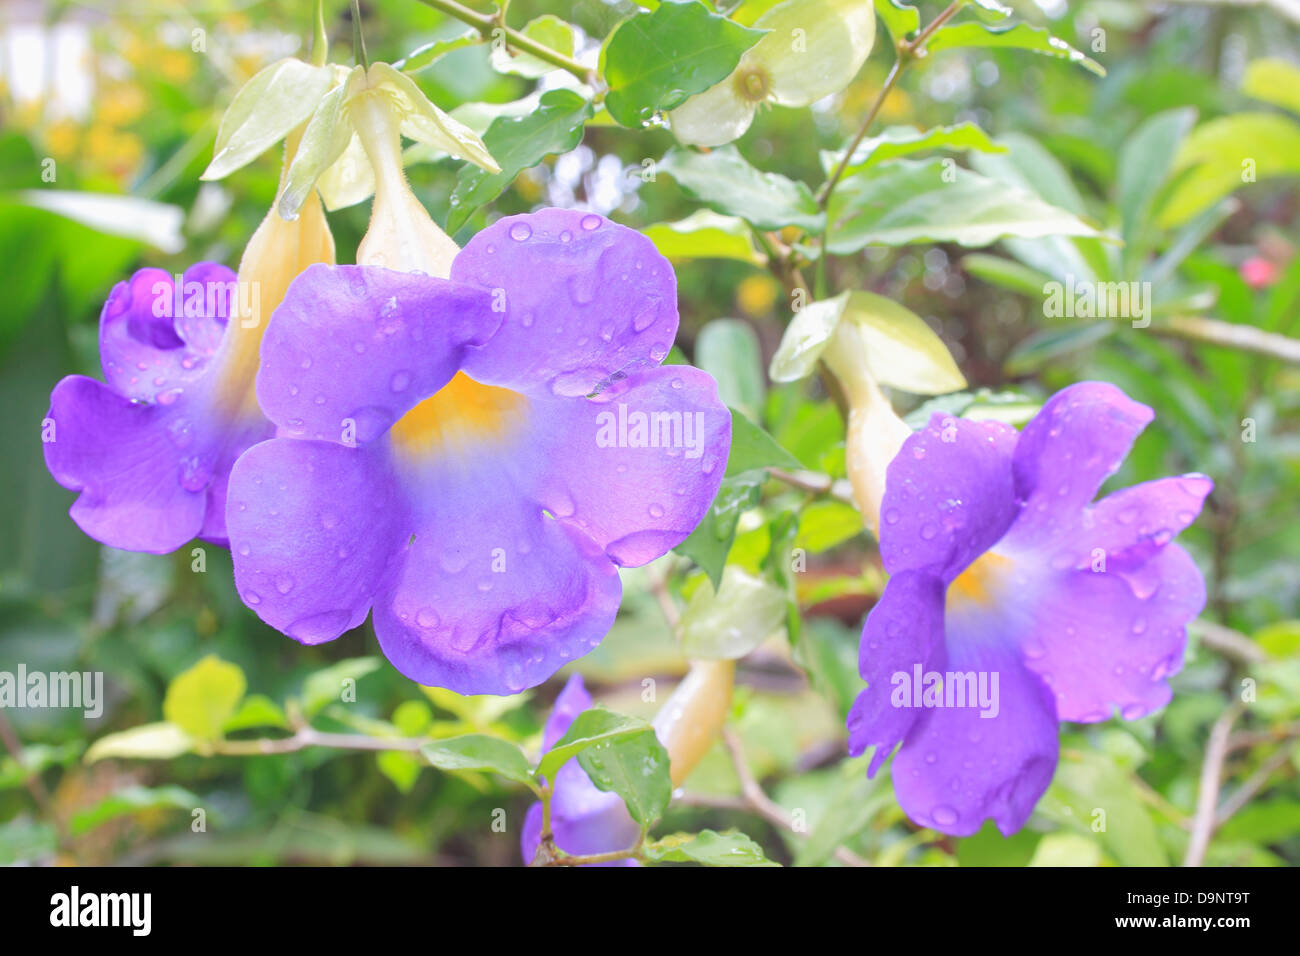 close up thunbergia against leaves Stock Photo